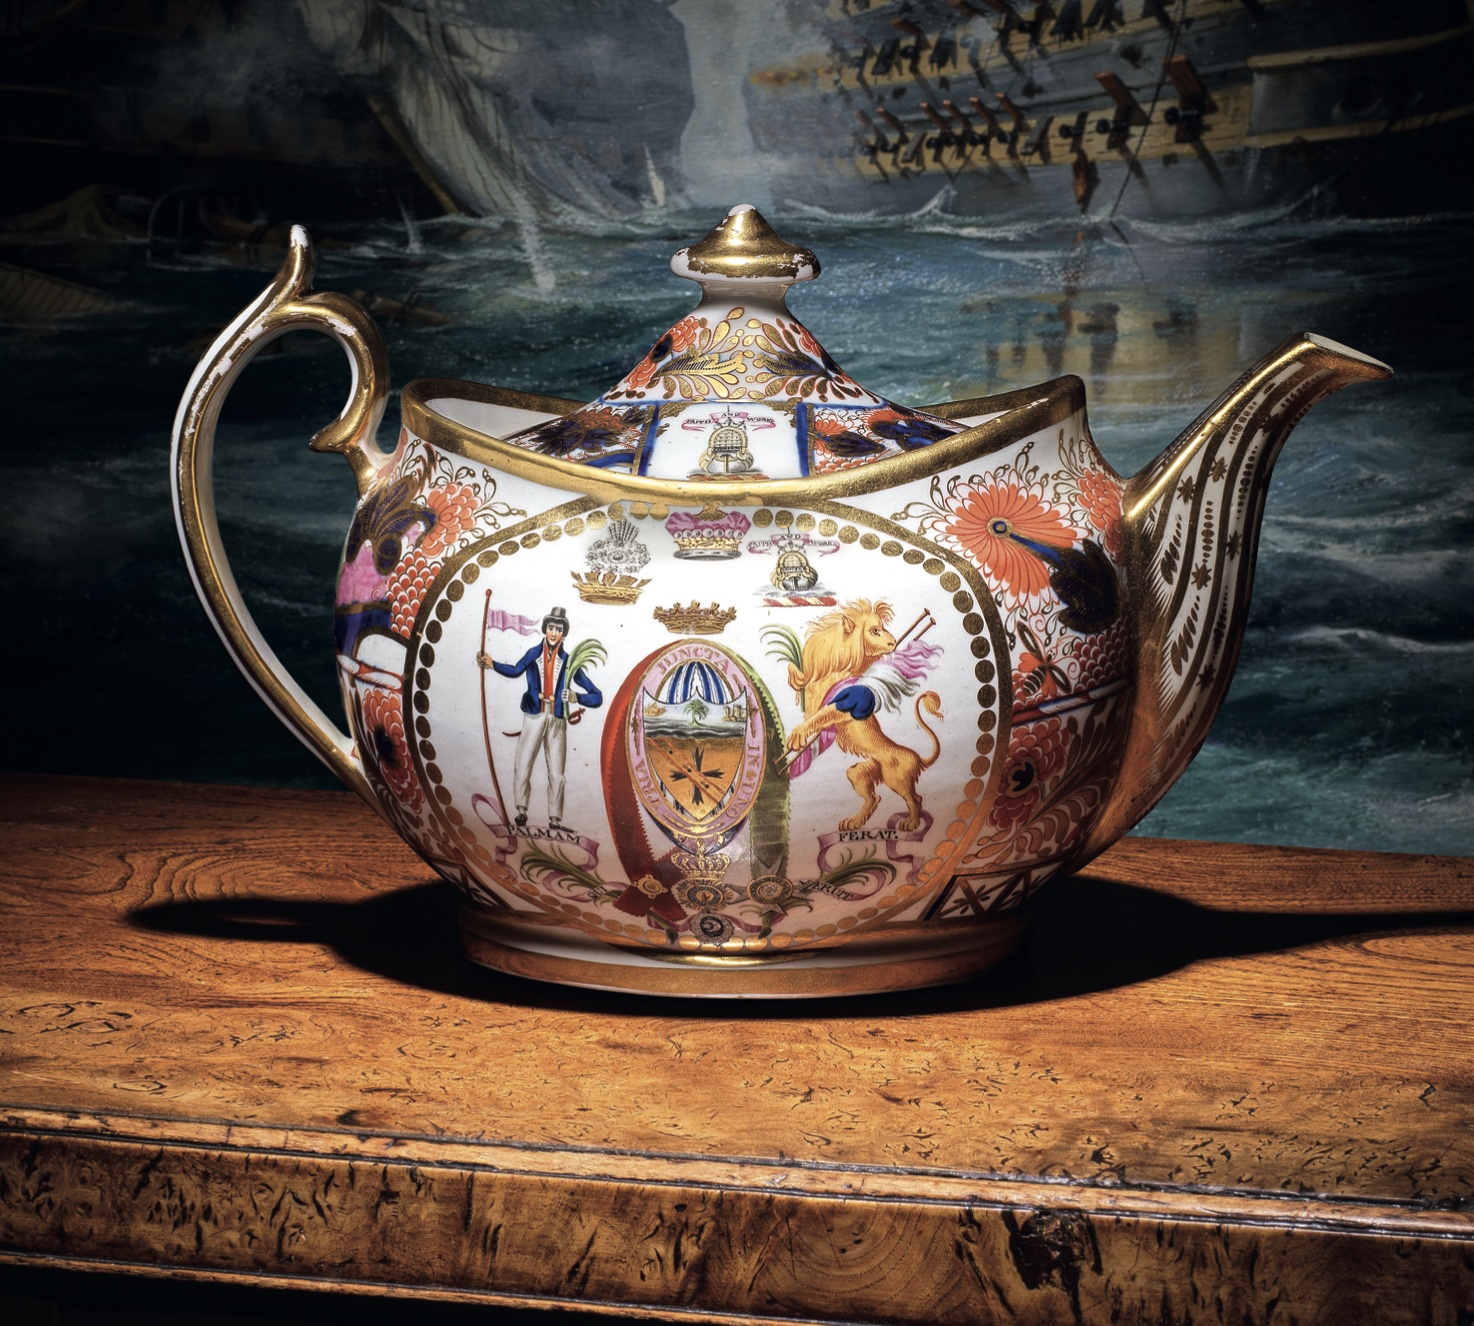 An antique ceramic teapot that belonged to Lord Horatio Nelson